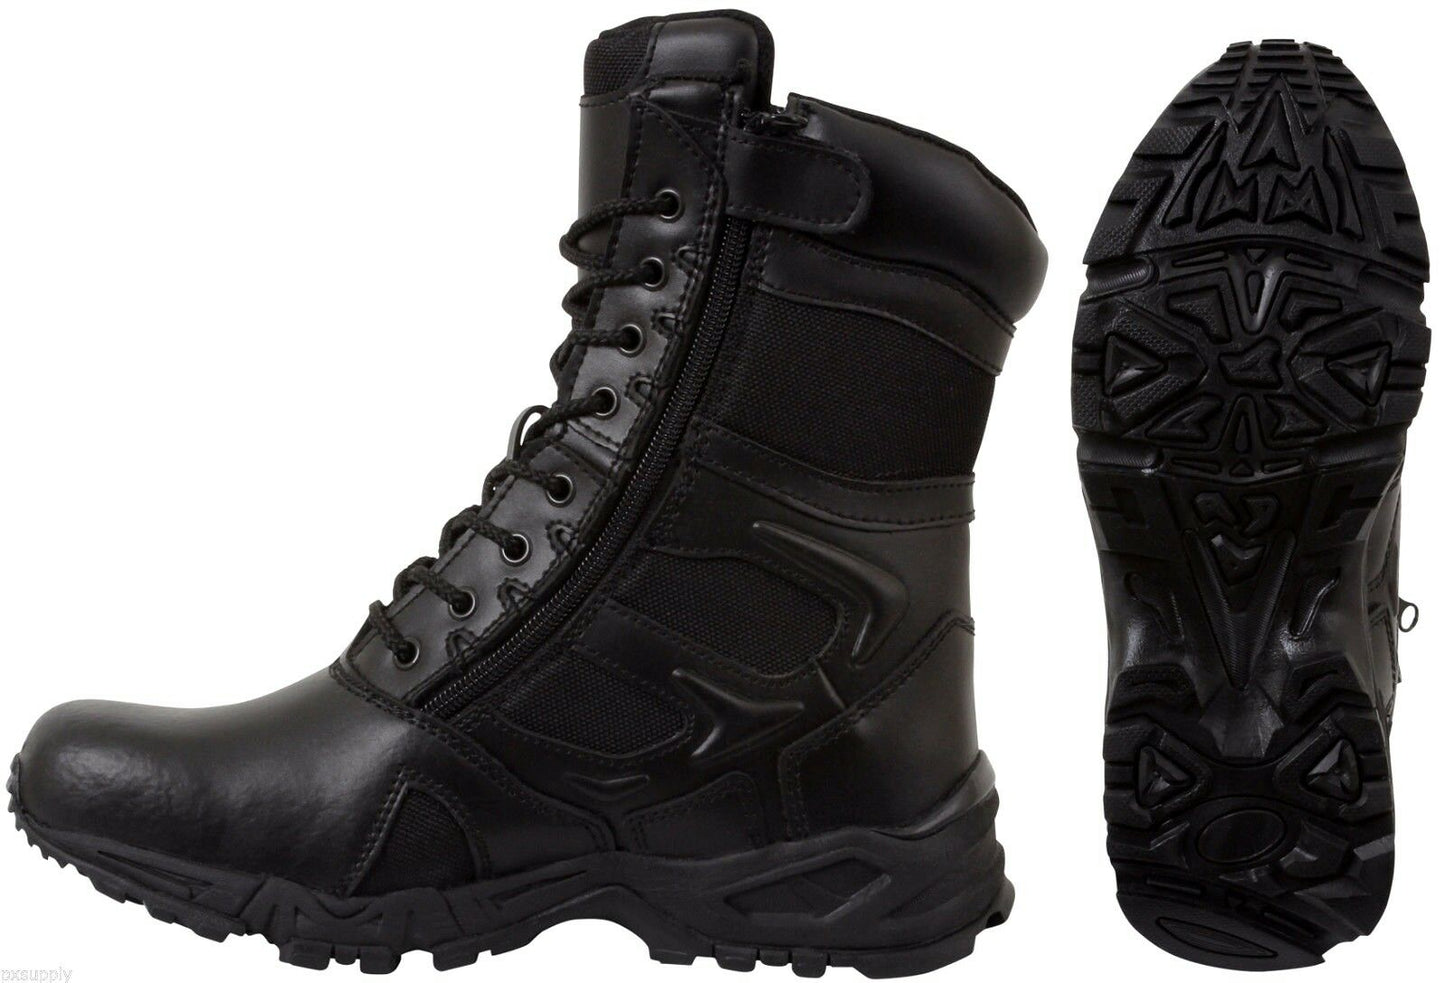 Rothco Forced Entry Deployment Boot With Side Zipper - 8 Inch Black